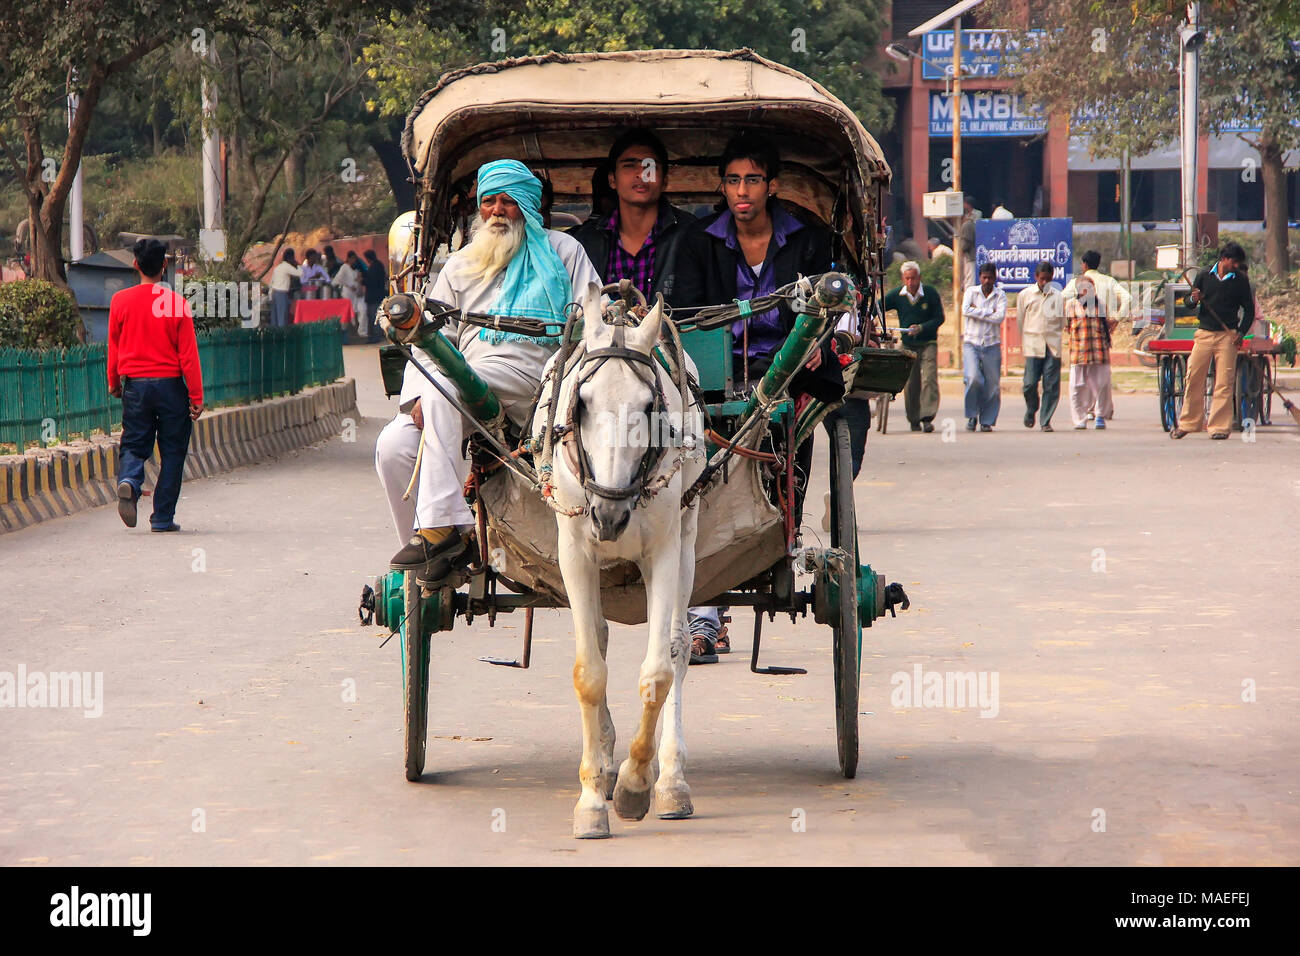 People riding in a horse cart in Agra, Uttar Pradesh, India. Agra is one of the most populous cities in Uttar Pradesh Stock Photo